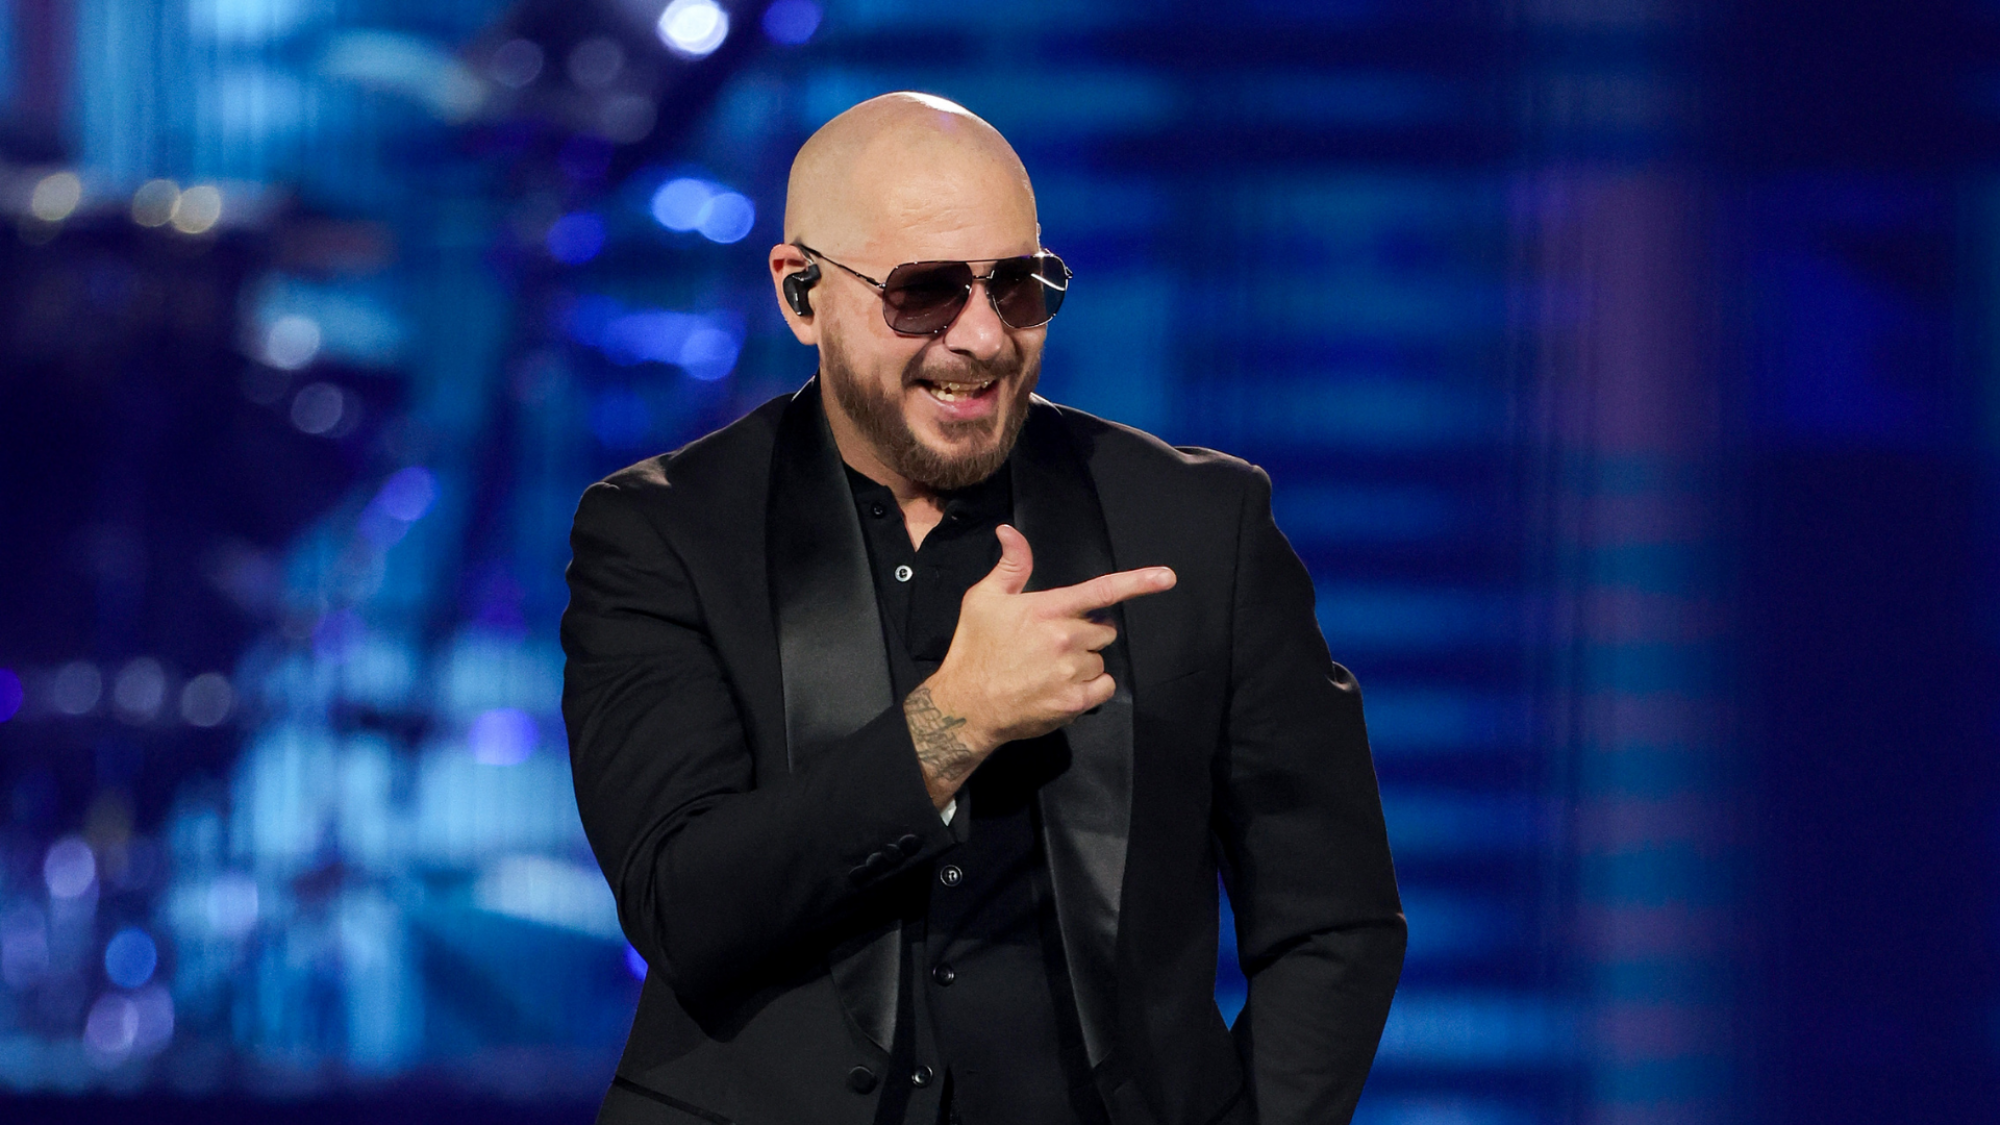 Pitbull (the singer) in black glasses and a black tux.